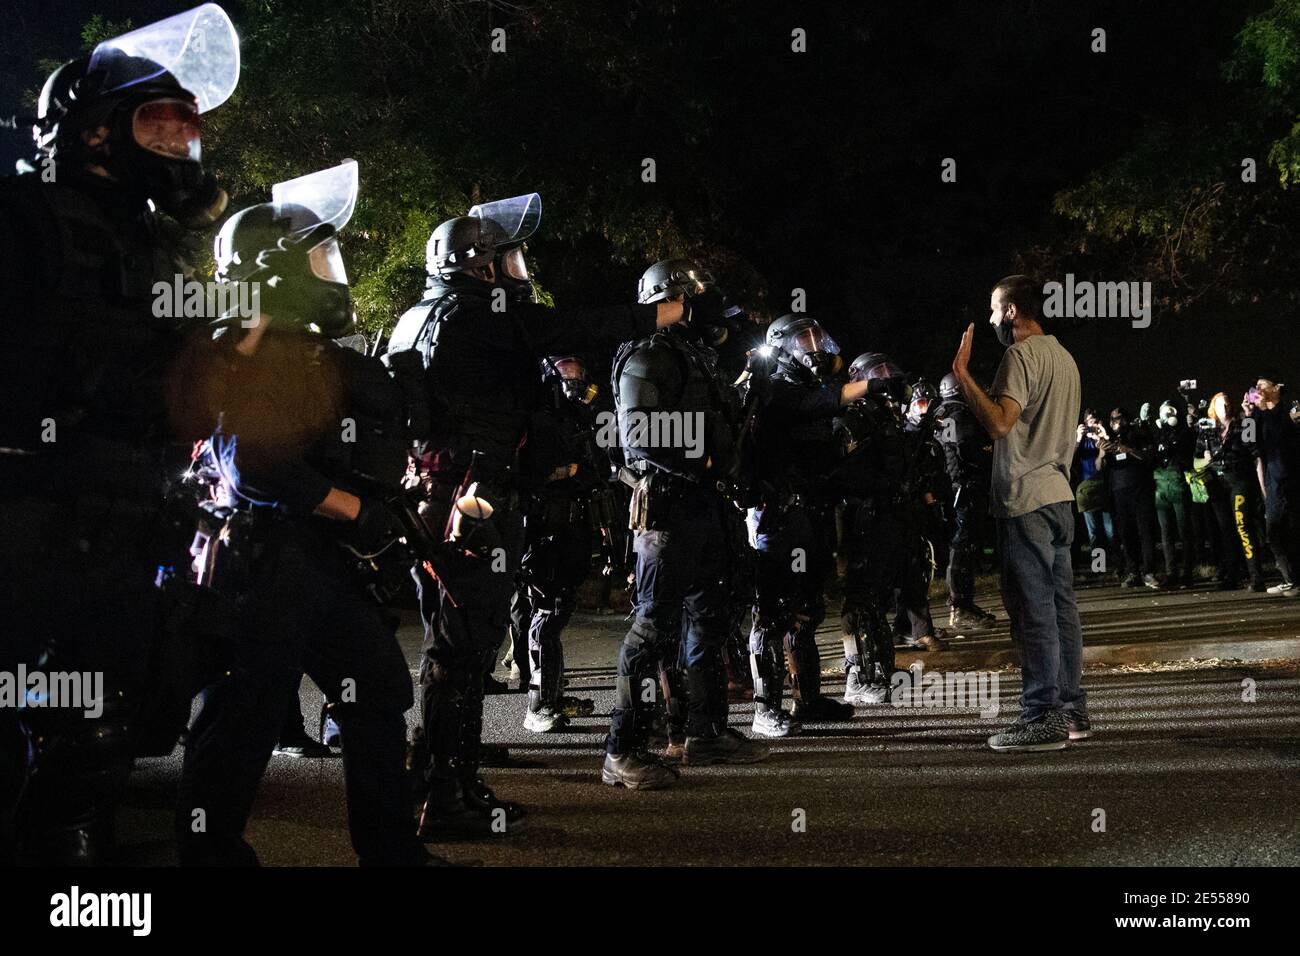 Portland Police officers face off with a protester after using CS gas and less lethal munitions to disperse demonstrators after a molotov cocktail was thrown on the 100th consecutive night of protests in Portland, Oregon, U.S. September 5, 2020. Picture taken September 5, 2020. REUTERS/Caitlin Ochs Stock Photo